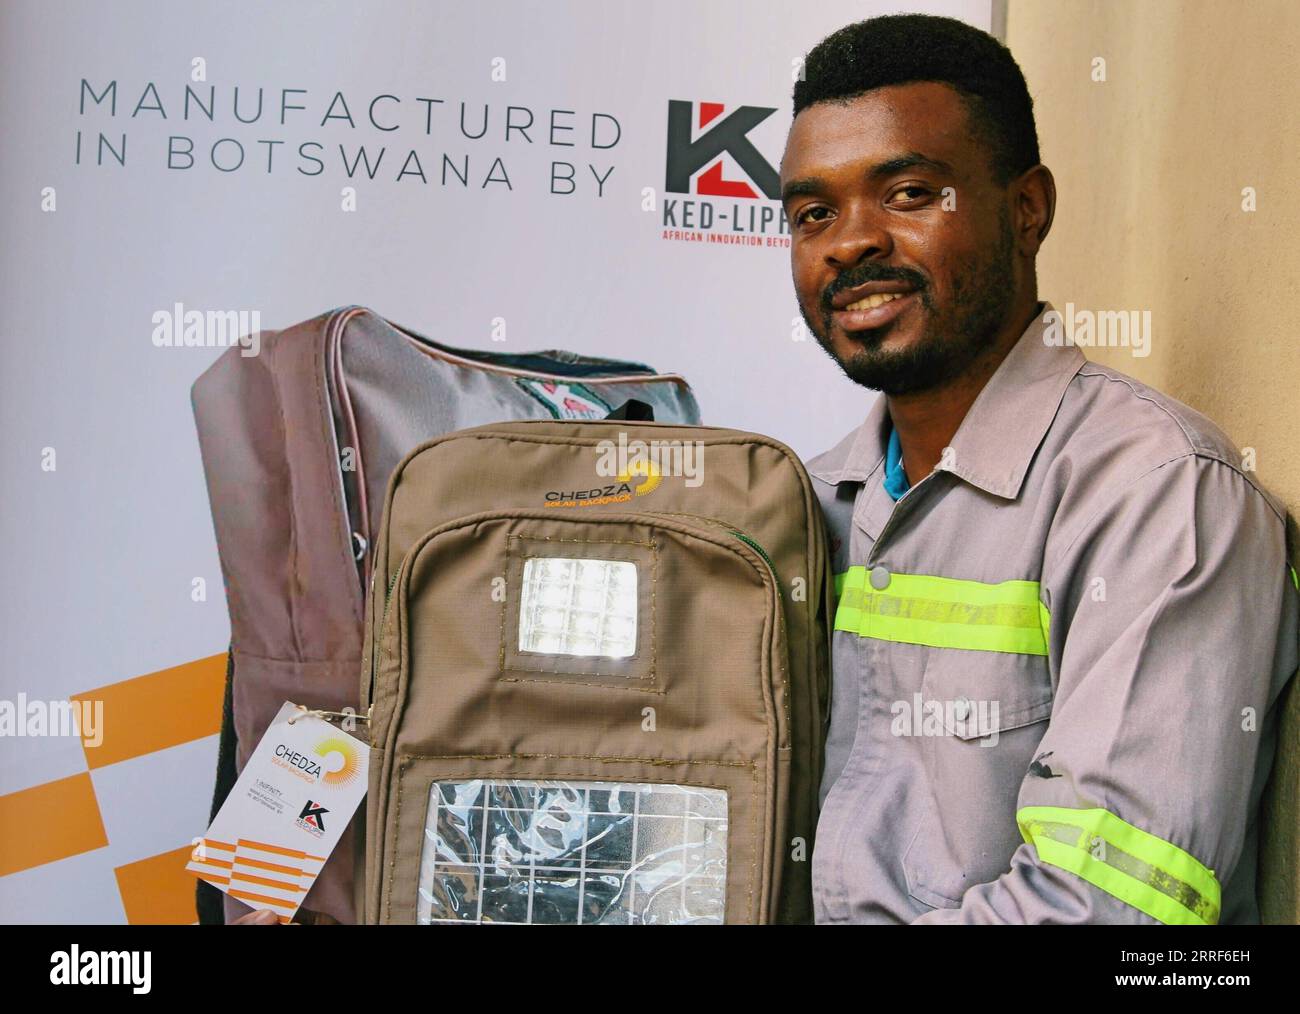 220331 -- GABORONE, March 31, 2022 -- Kedumetse Liphi, the 31-year-old innovative creator of Chedza Solar Backpacks, shows a solar backpack in Gaborone, Botswana, on March 21, 2022. In the first week of April, disadvantaged children in Botswana villages such as Tshono, Mokhomba, Lefoko and Sevrelela will receive Chedza Solar Backpacks that will enable them to study at night. Photo by /Xinhua TO GO WITH Feature: Solar backpacks aid students learning, clean energy uptake in Botswana BOTSWANA-GABORONE-SOLAR BACKPACKS SharonxTshipa PUBLICATIONxNOTxINxCHN Stock Photo